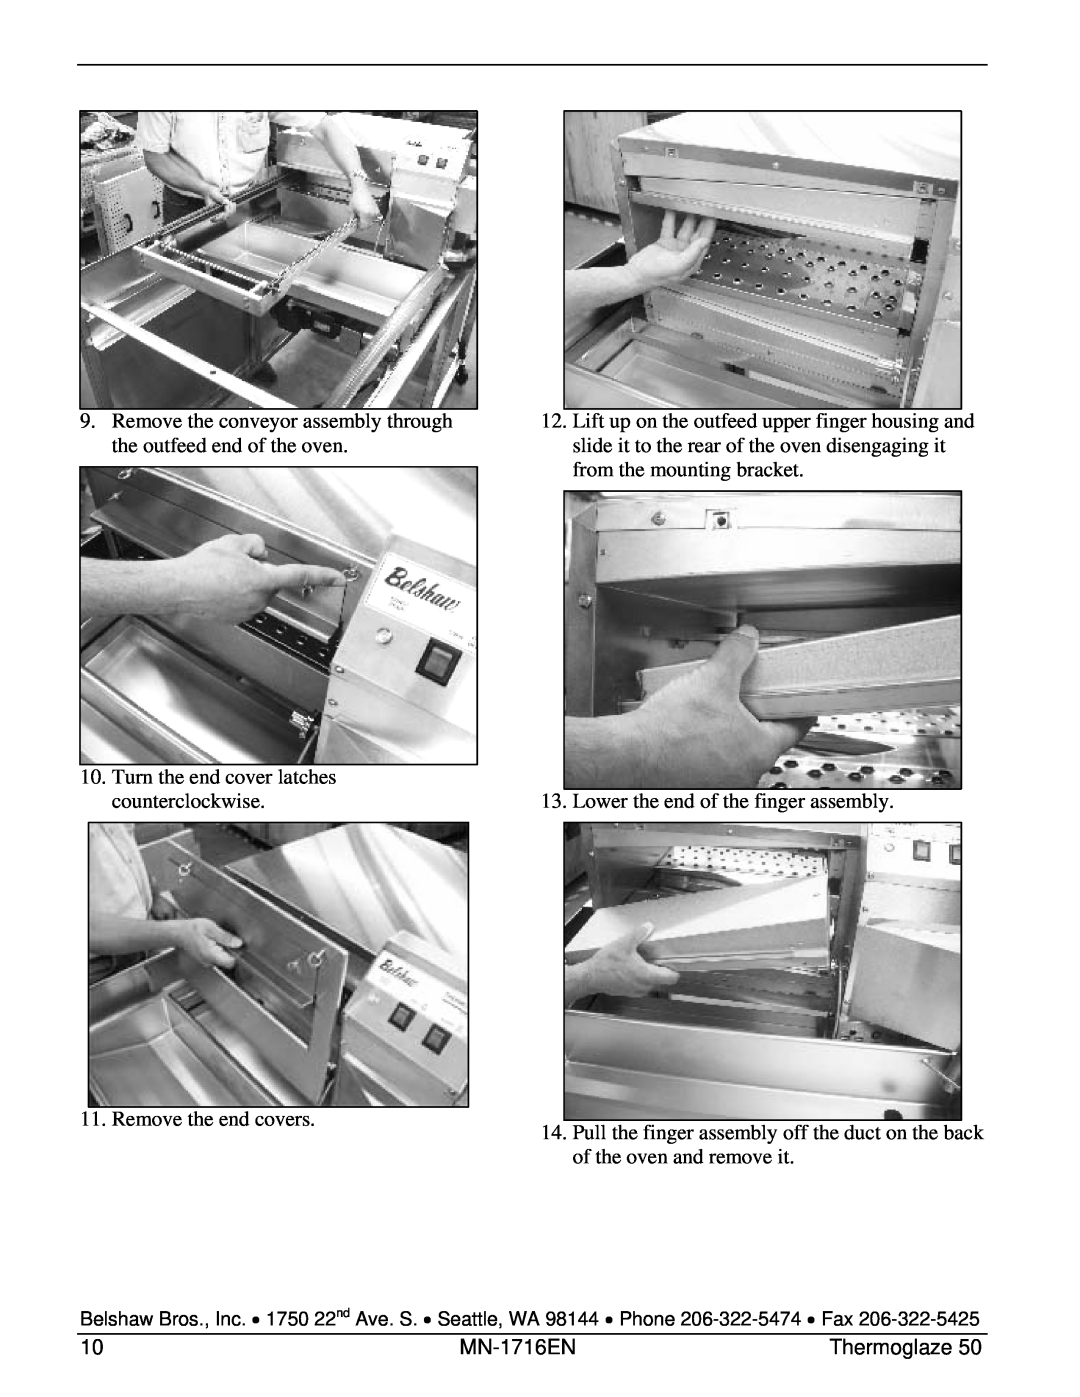 Belshaw Brothers TG 50 manual Remove the conveyor assembly through the outfeed end of the oven 